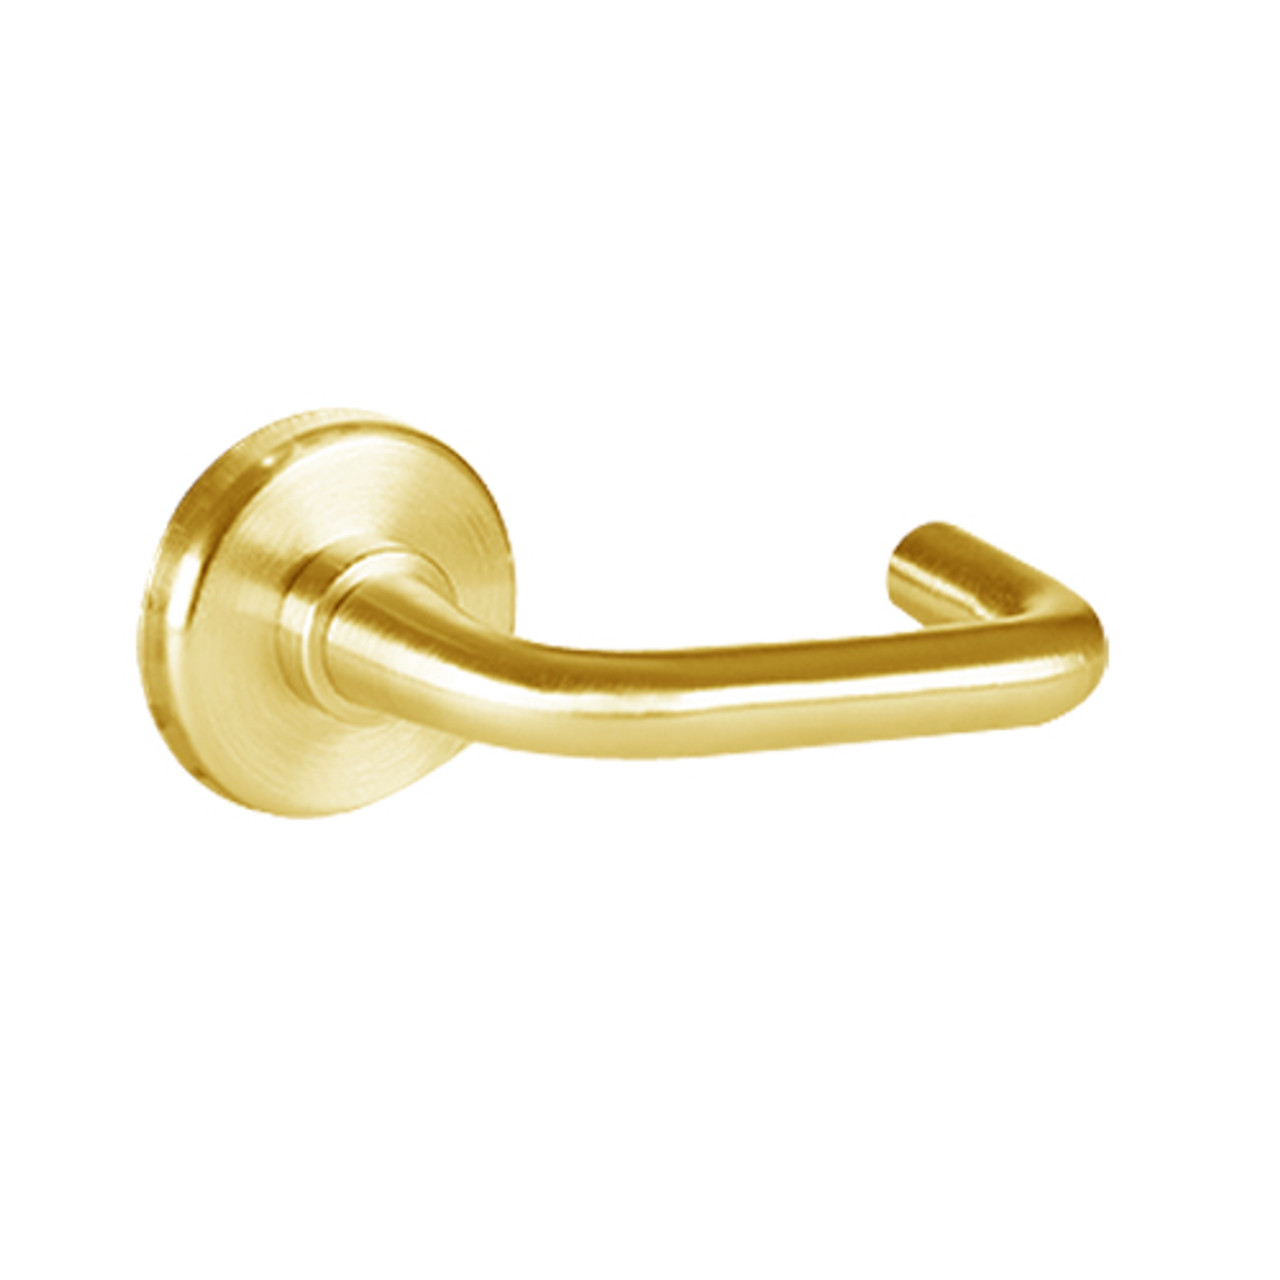 40HTKIS13H605 Best 40H Series Trim Kits Inside Lever Only with Solid Tube-Return Trim Style in Bright Brass